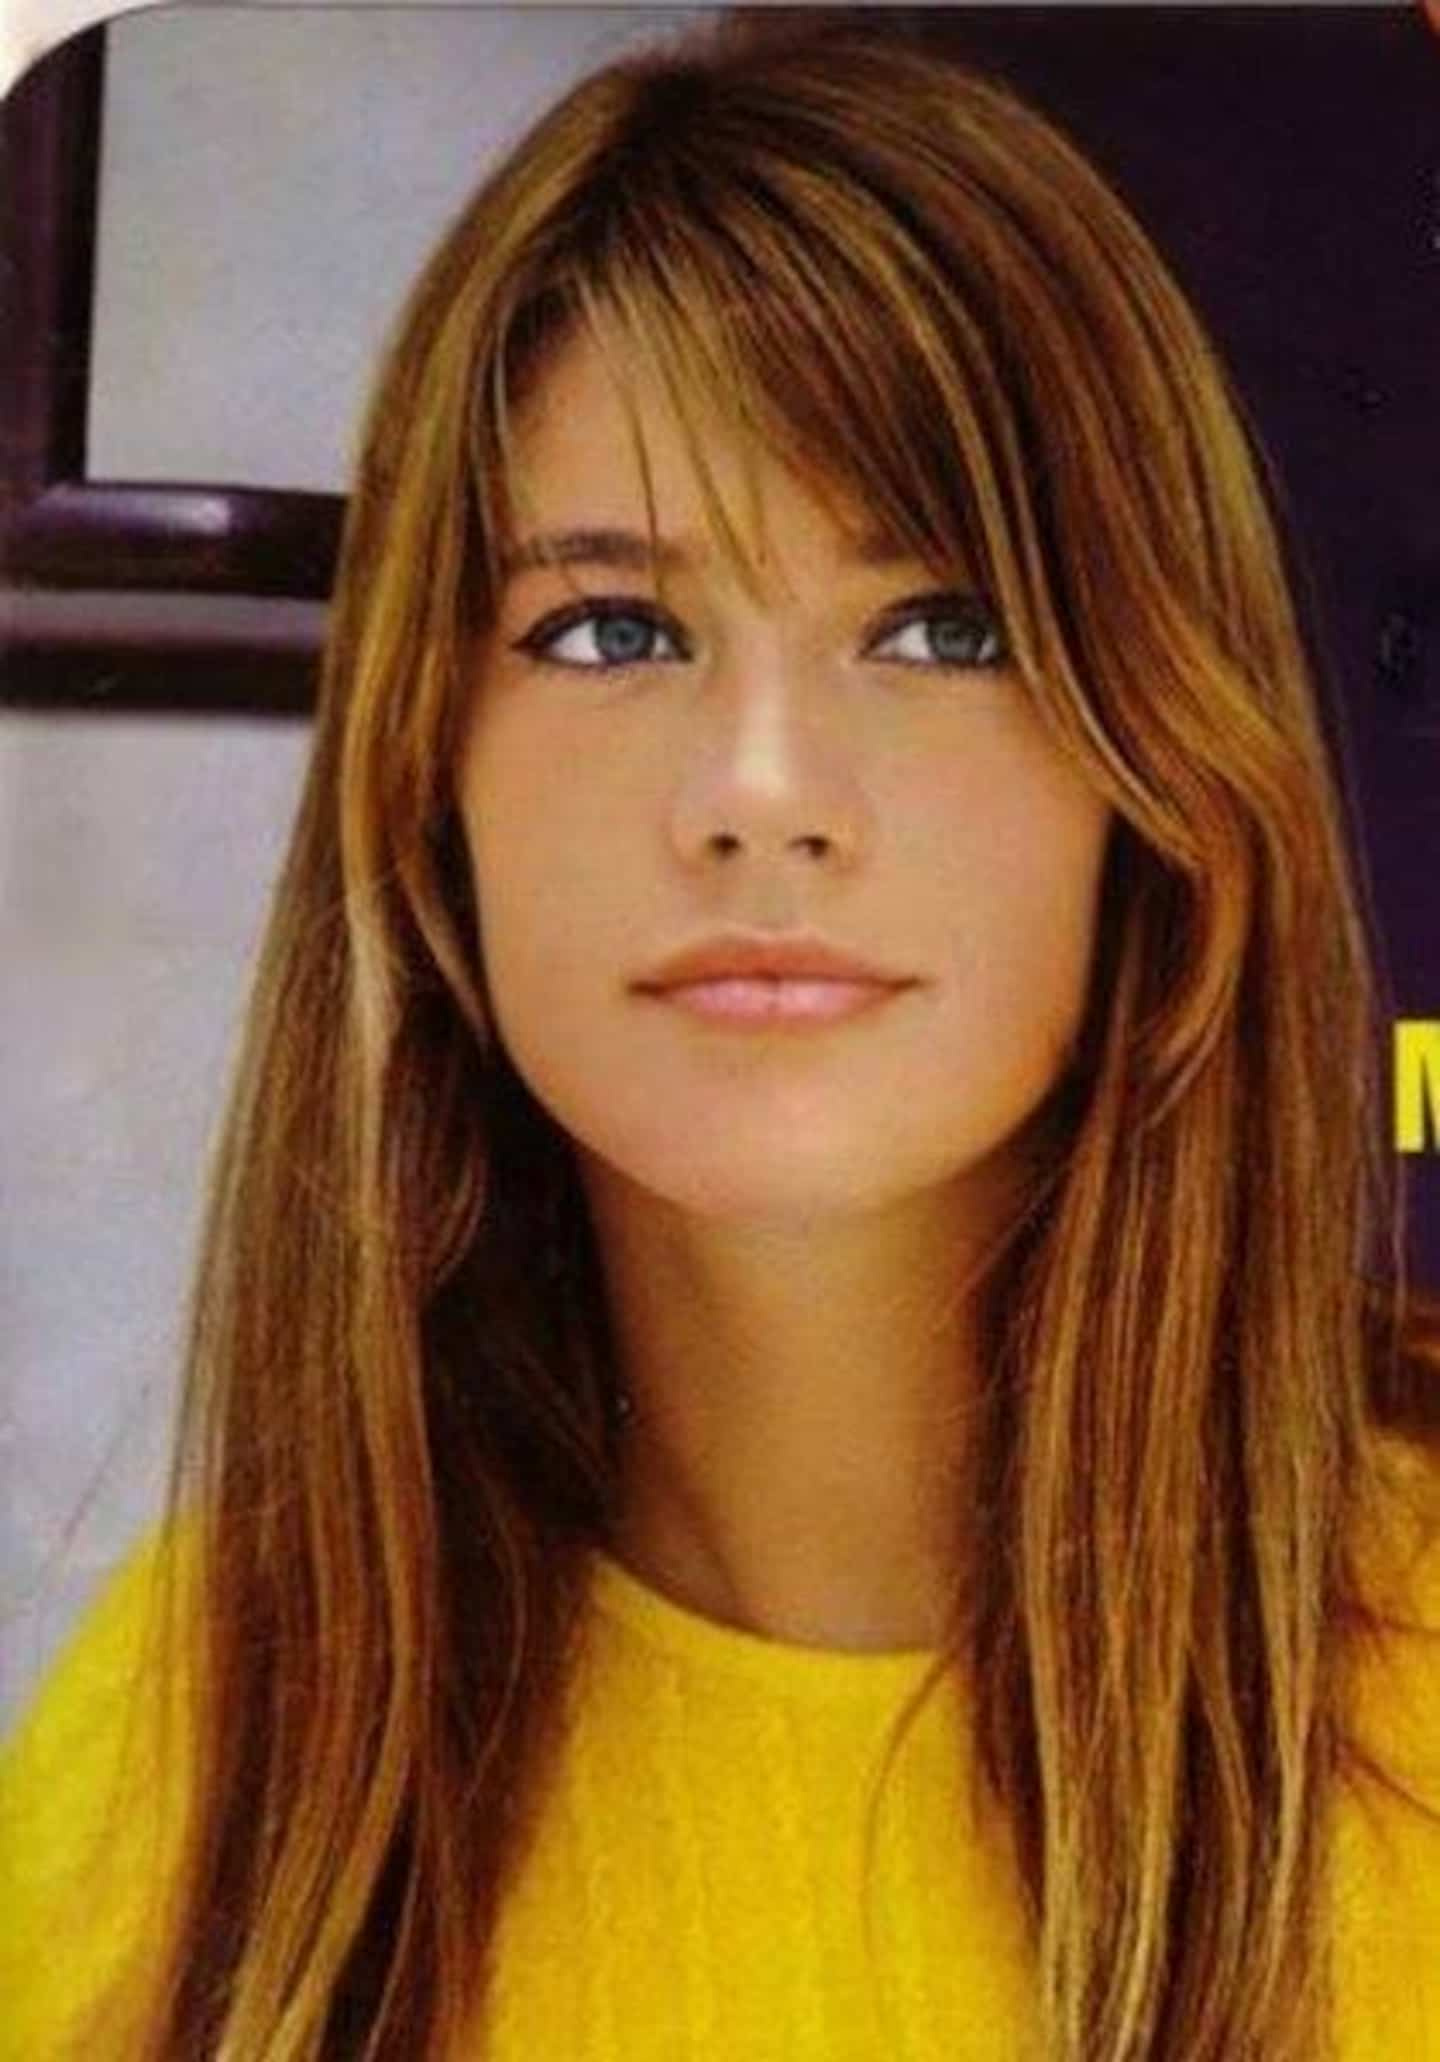 Controversial Rolling Stone awards: Françoise Hardy is surprised to be among the 200 best singers of all time